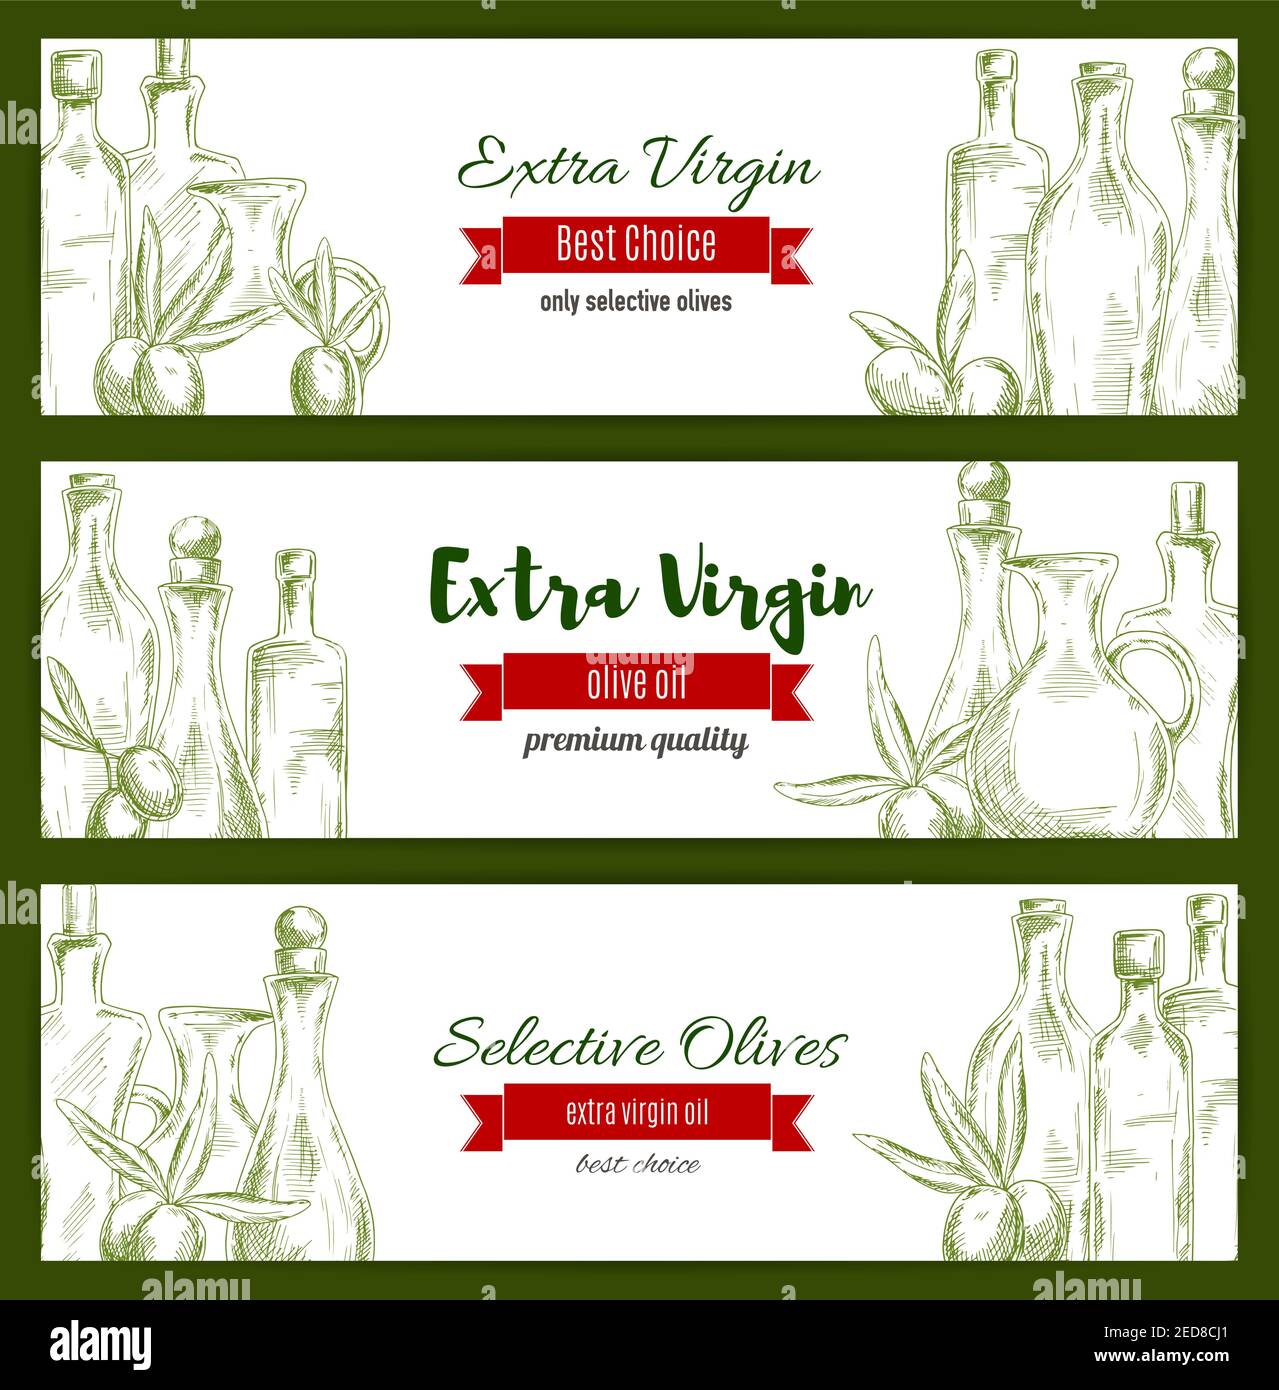 Olives and olive oil sketch. Banners set of green olive branches and oil bottles. Vector sketched design for extra virgin olive oil label. Healthy veg Stock Vector